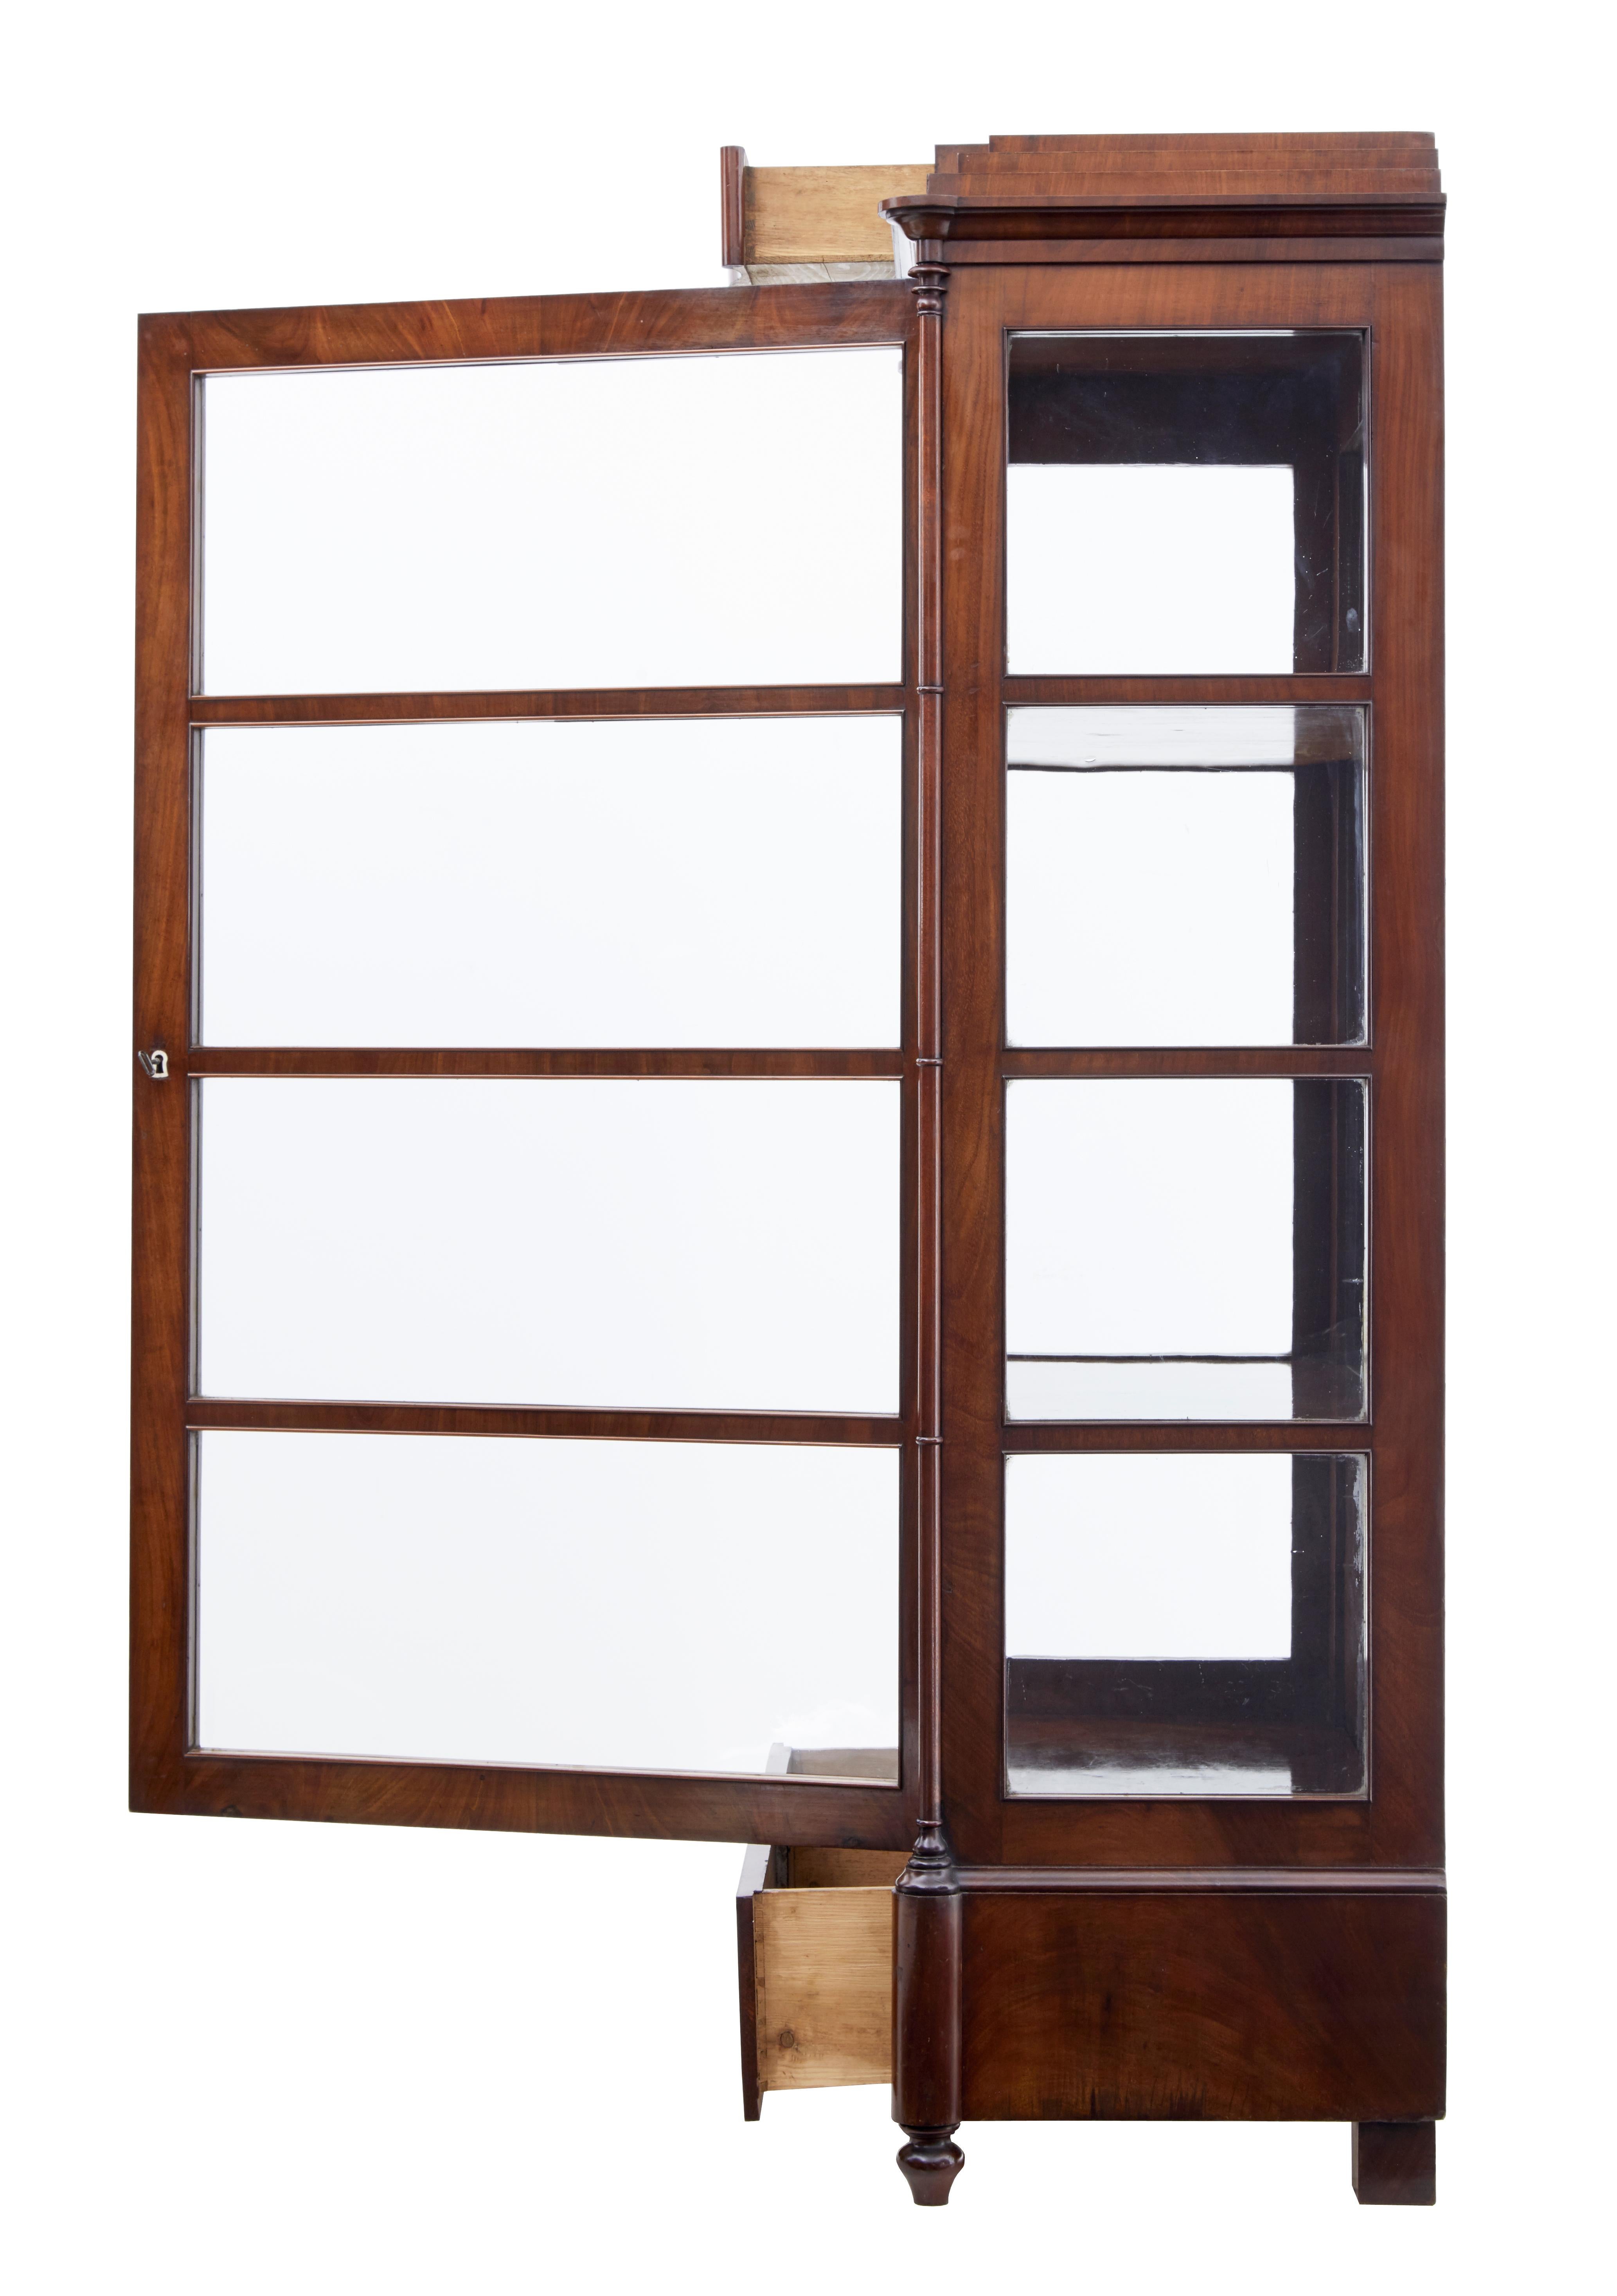 Rare Danish flame mahogany display cabinet, circa 1840.
Single door cabinet containing three mahogany shelves with original mirrored back panels.
Original glazing to the front and sides.
Concealed drawer in the pediment with a further deep drawer